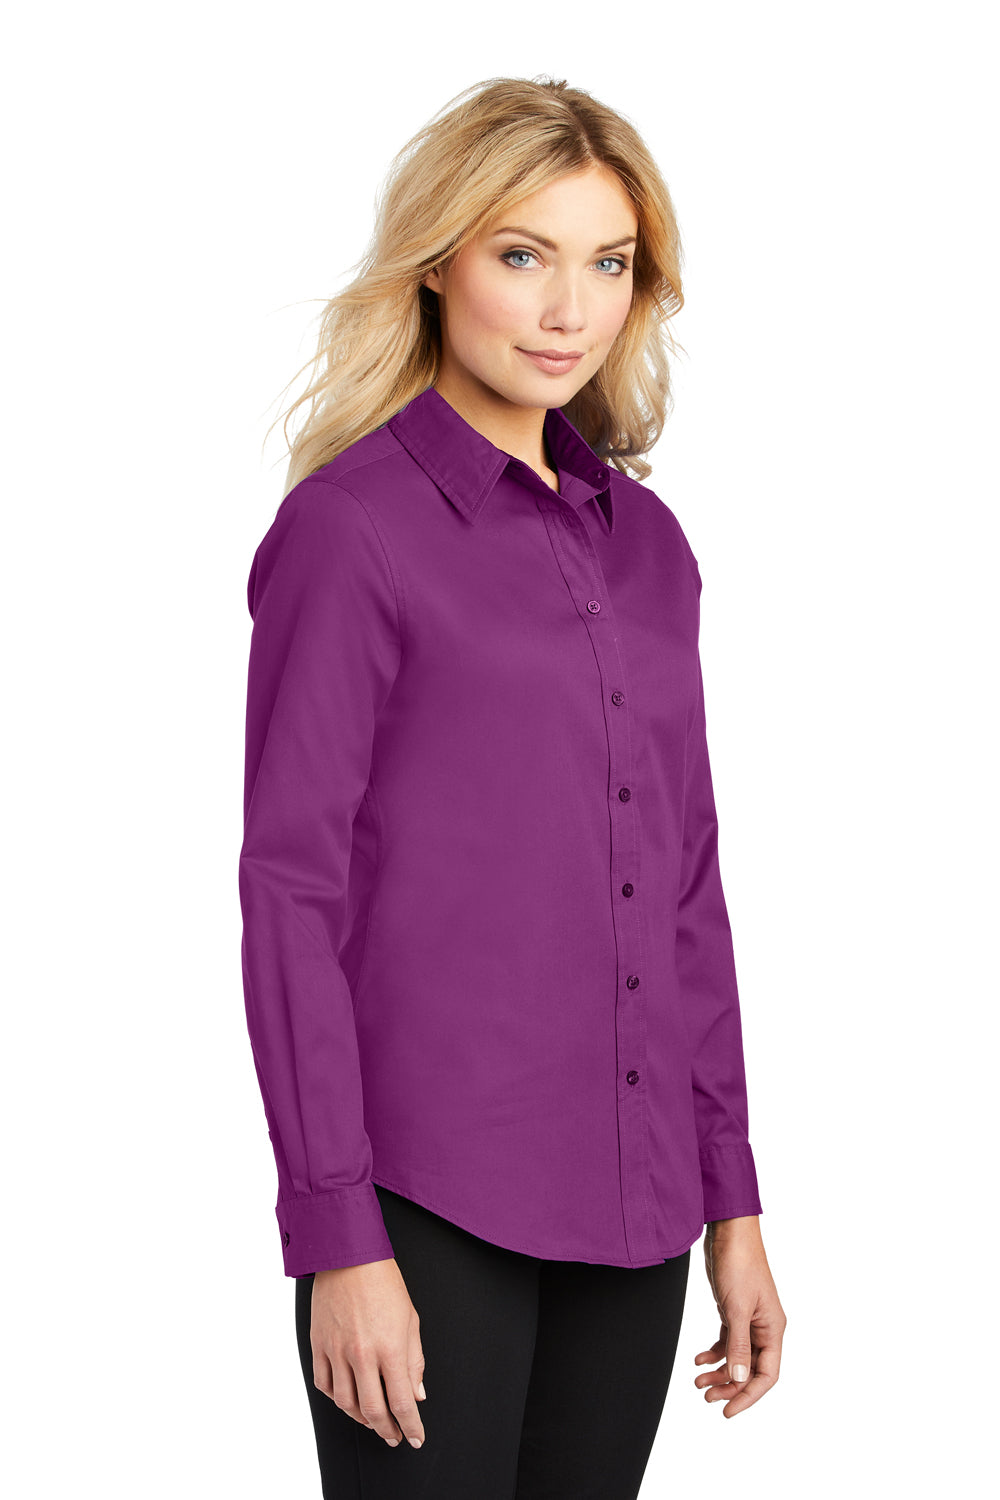 Port Authority L608 Womens Easy Care Wrinkle Resistant Long Sleeve Button Down Shirt Deep Berry Purple 3Q